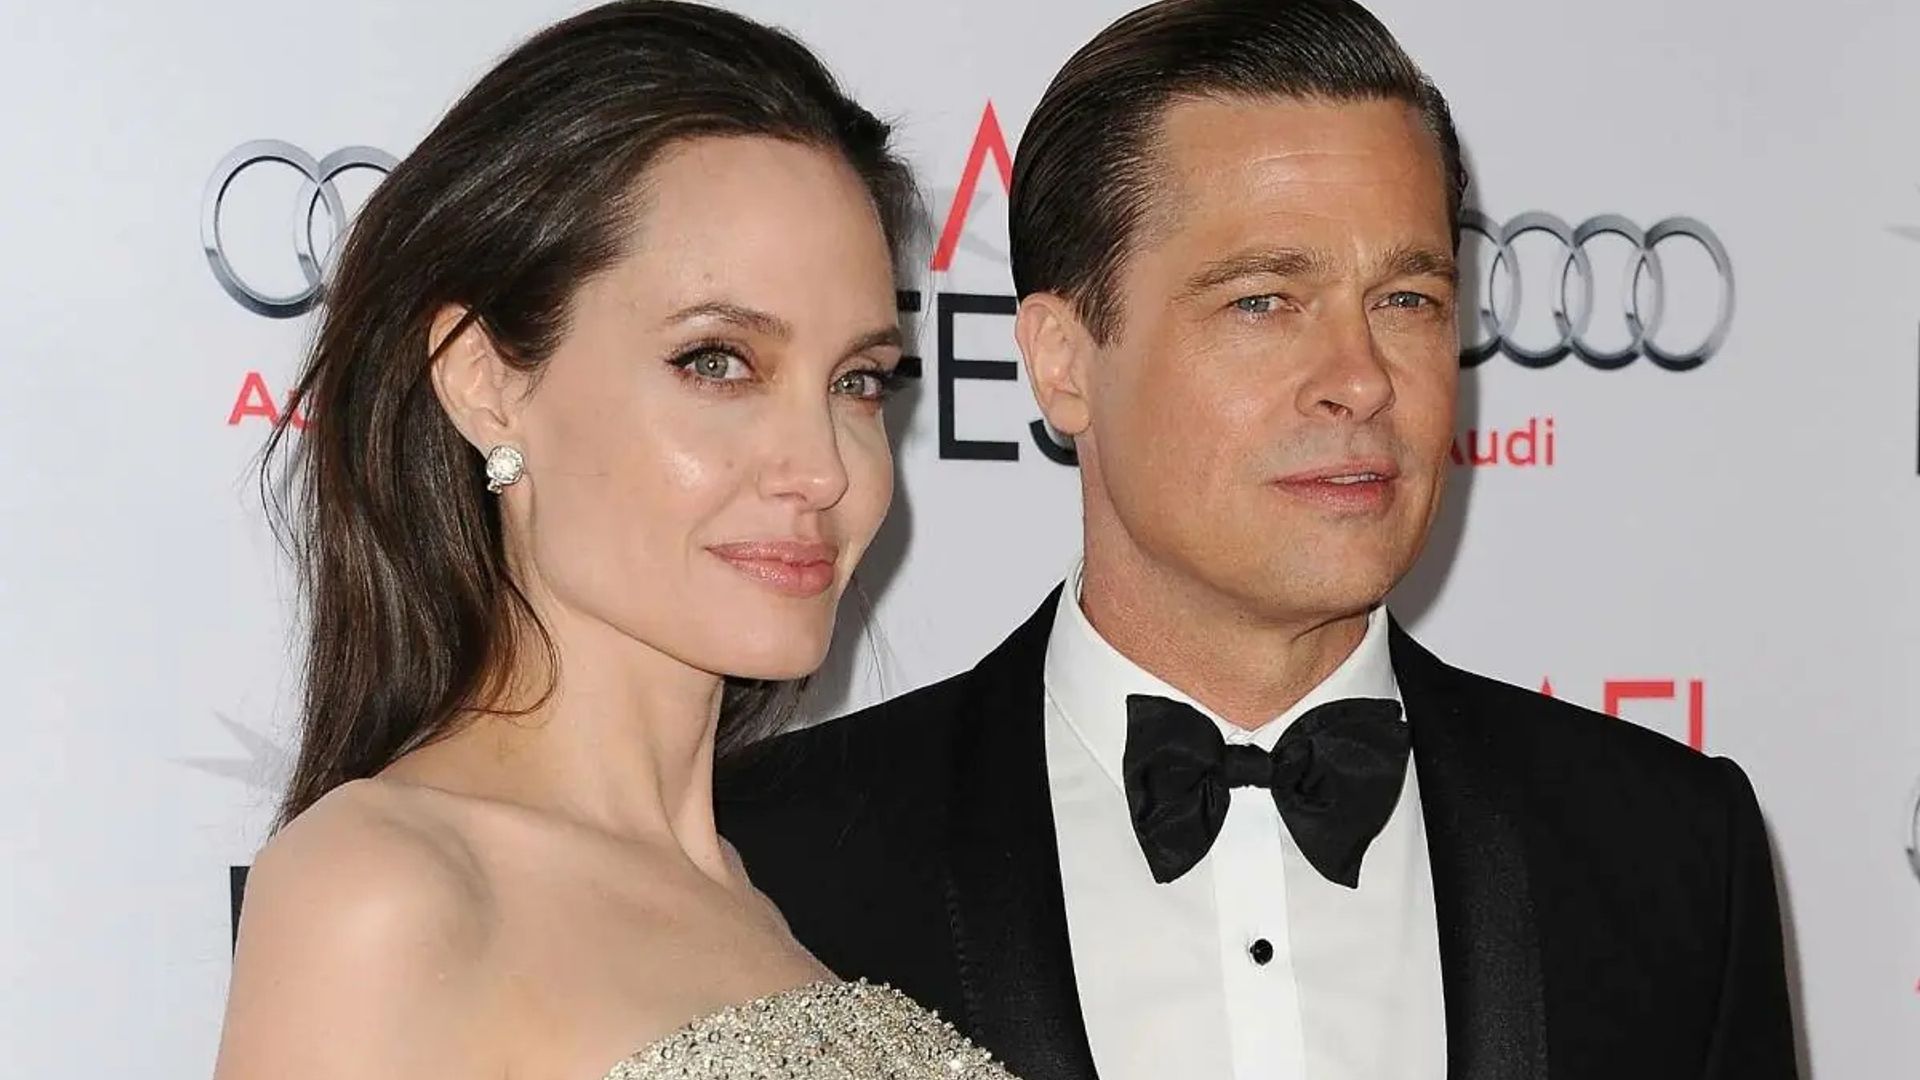 Brad Pitt 'files lawsuit against Angelina Jolie' as she sells her stake in Chateau Miraval